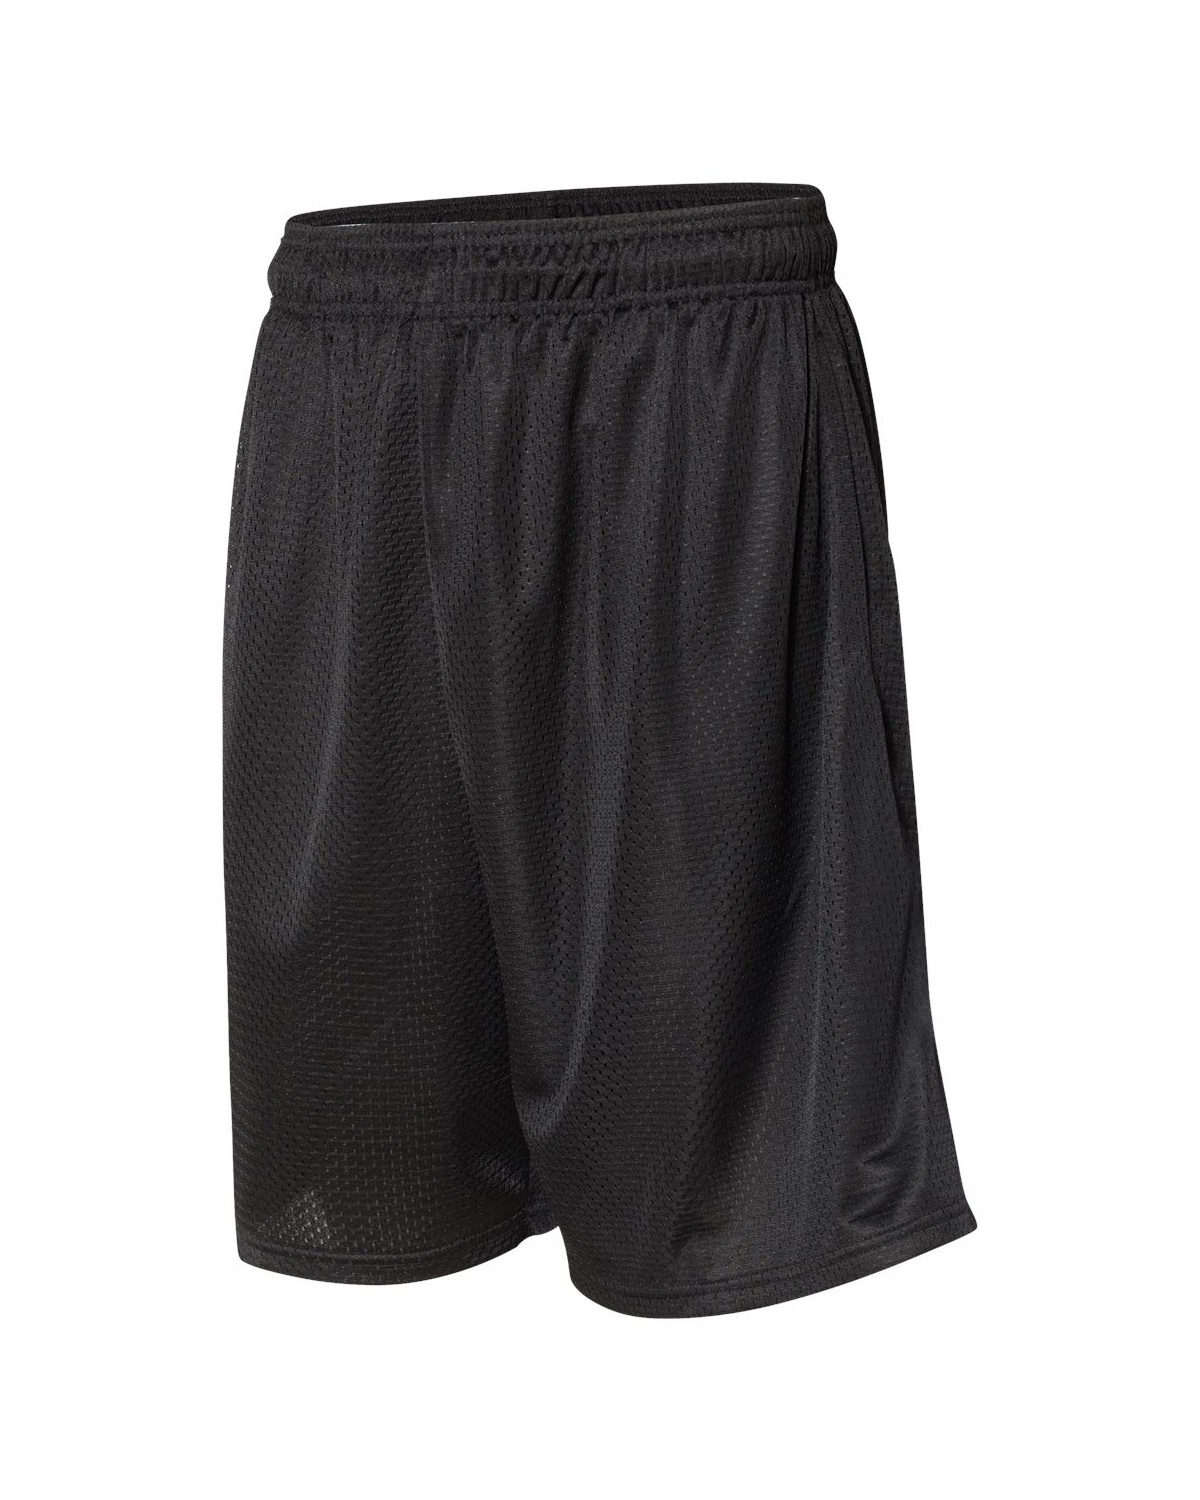 Russell Athletics Men's Mesh Shorts - Versatile Workout Attire with  Pockets, Dry Fit Performance for Gym and Workouts